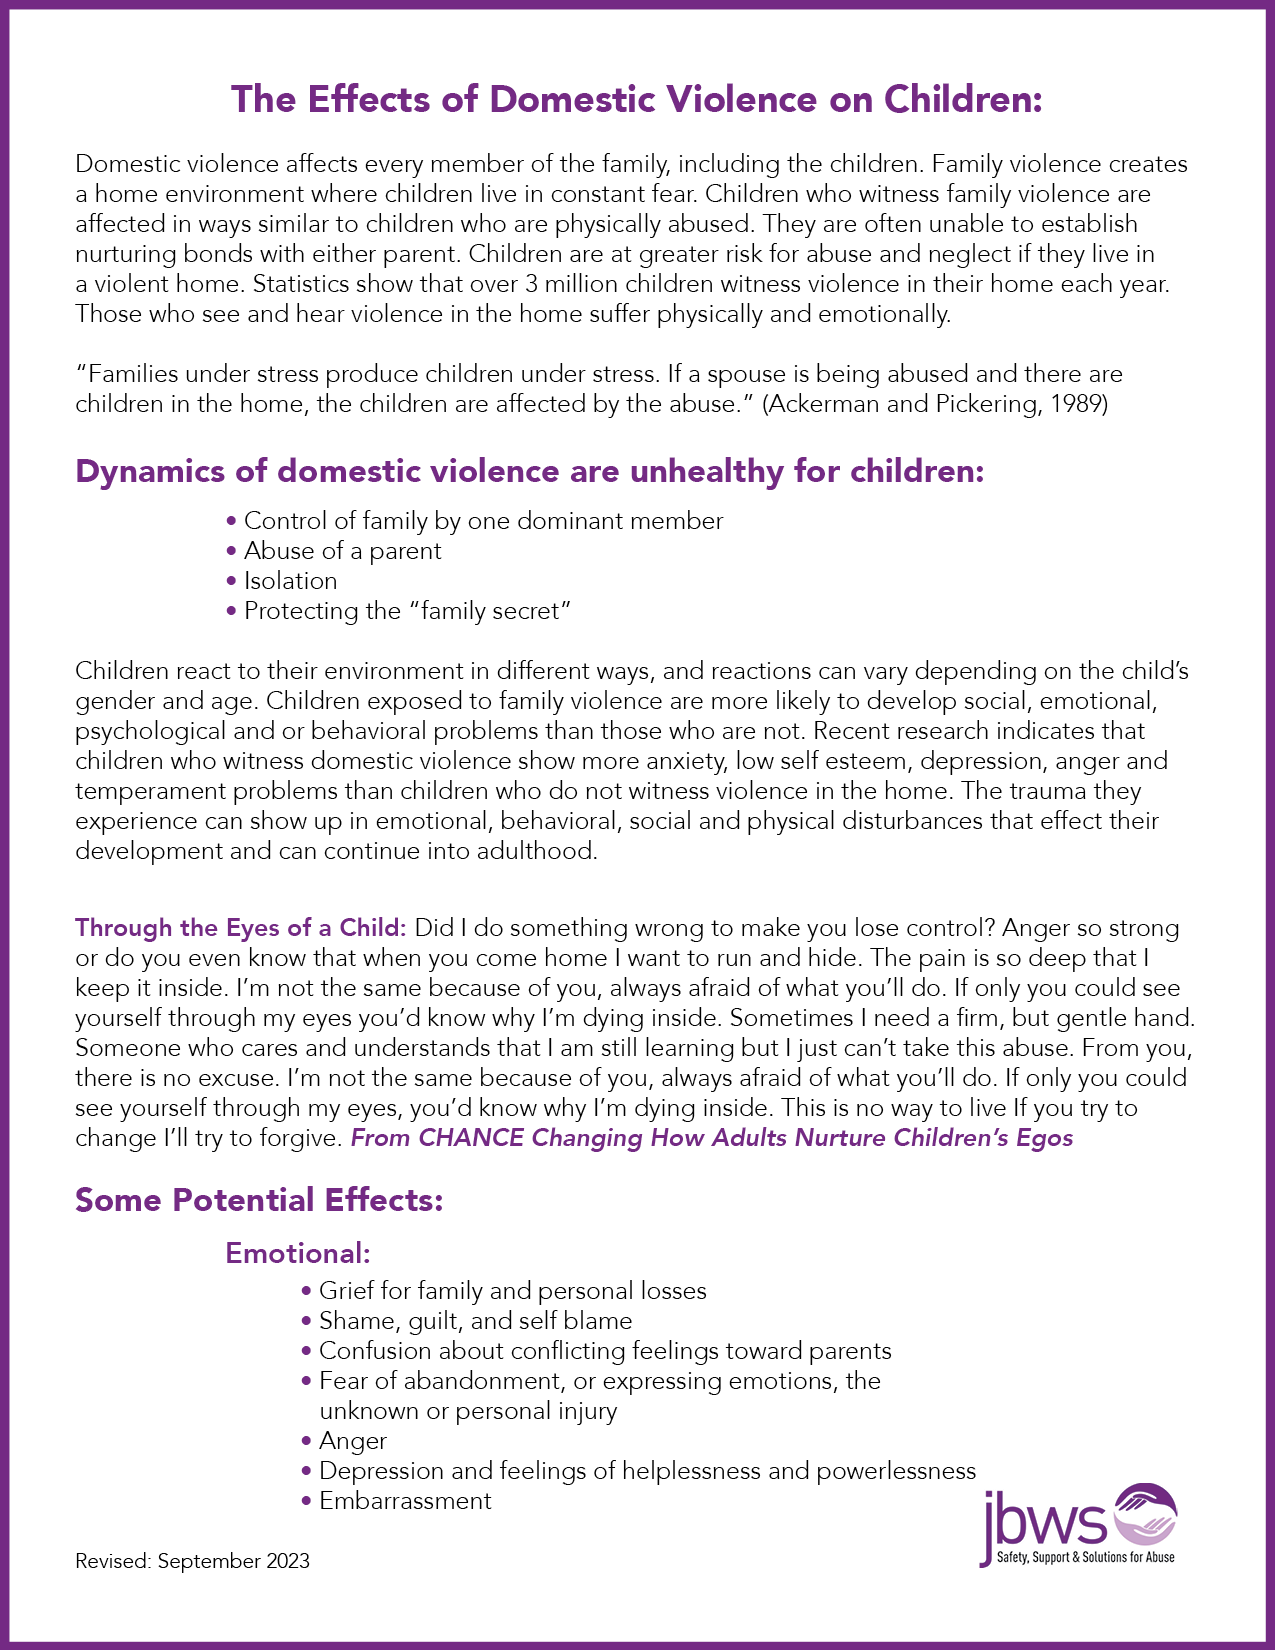 The-Effects-of-Domestic-Violence-on-Children-